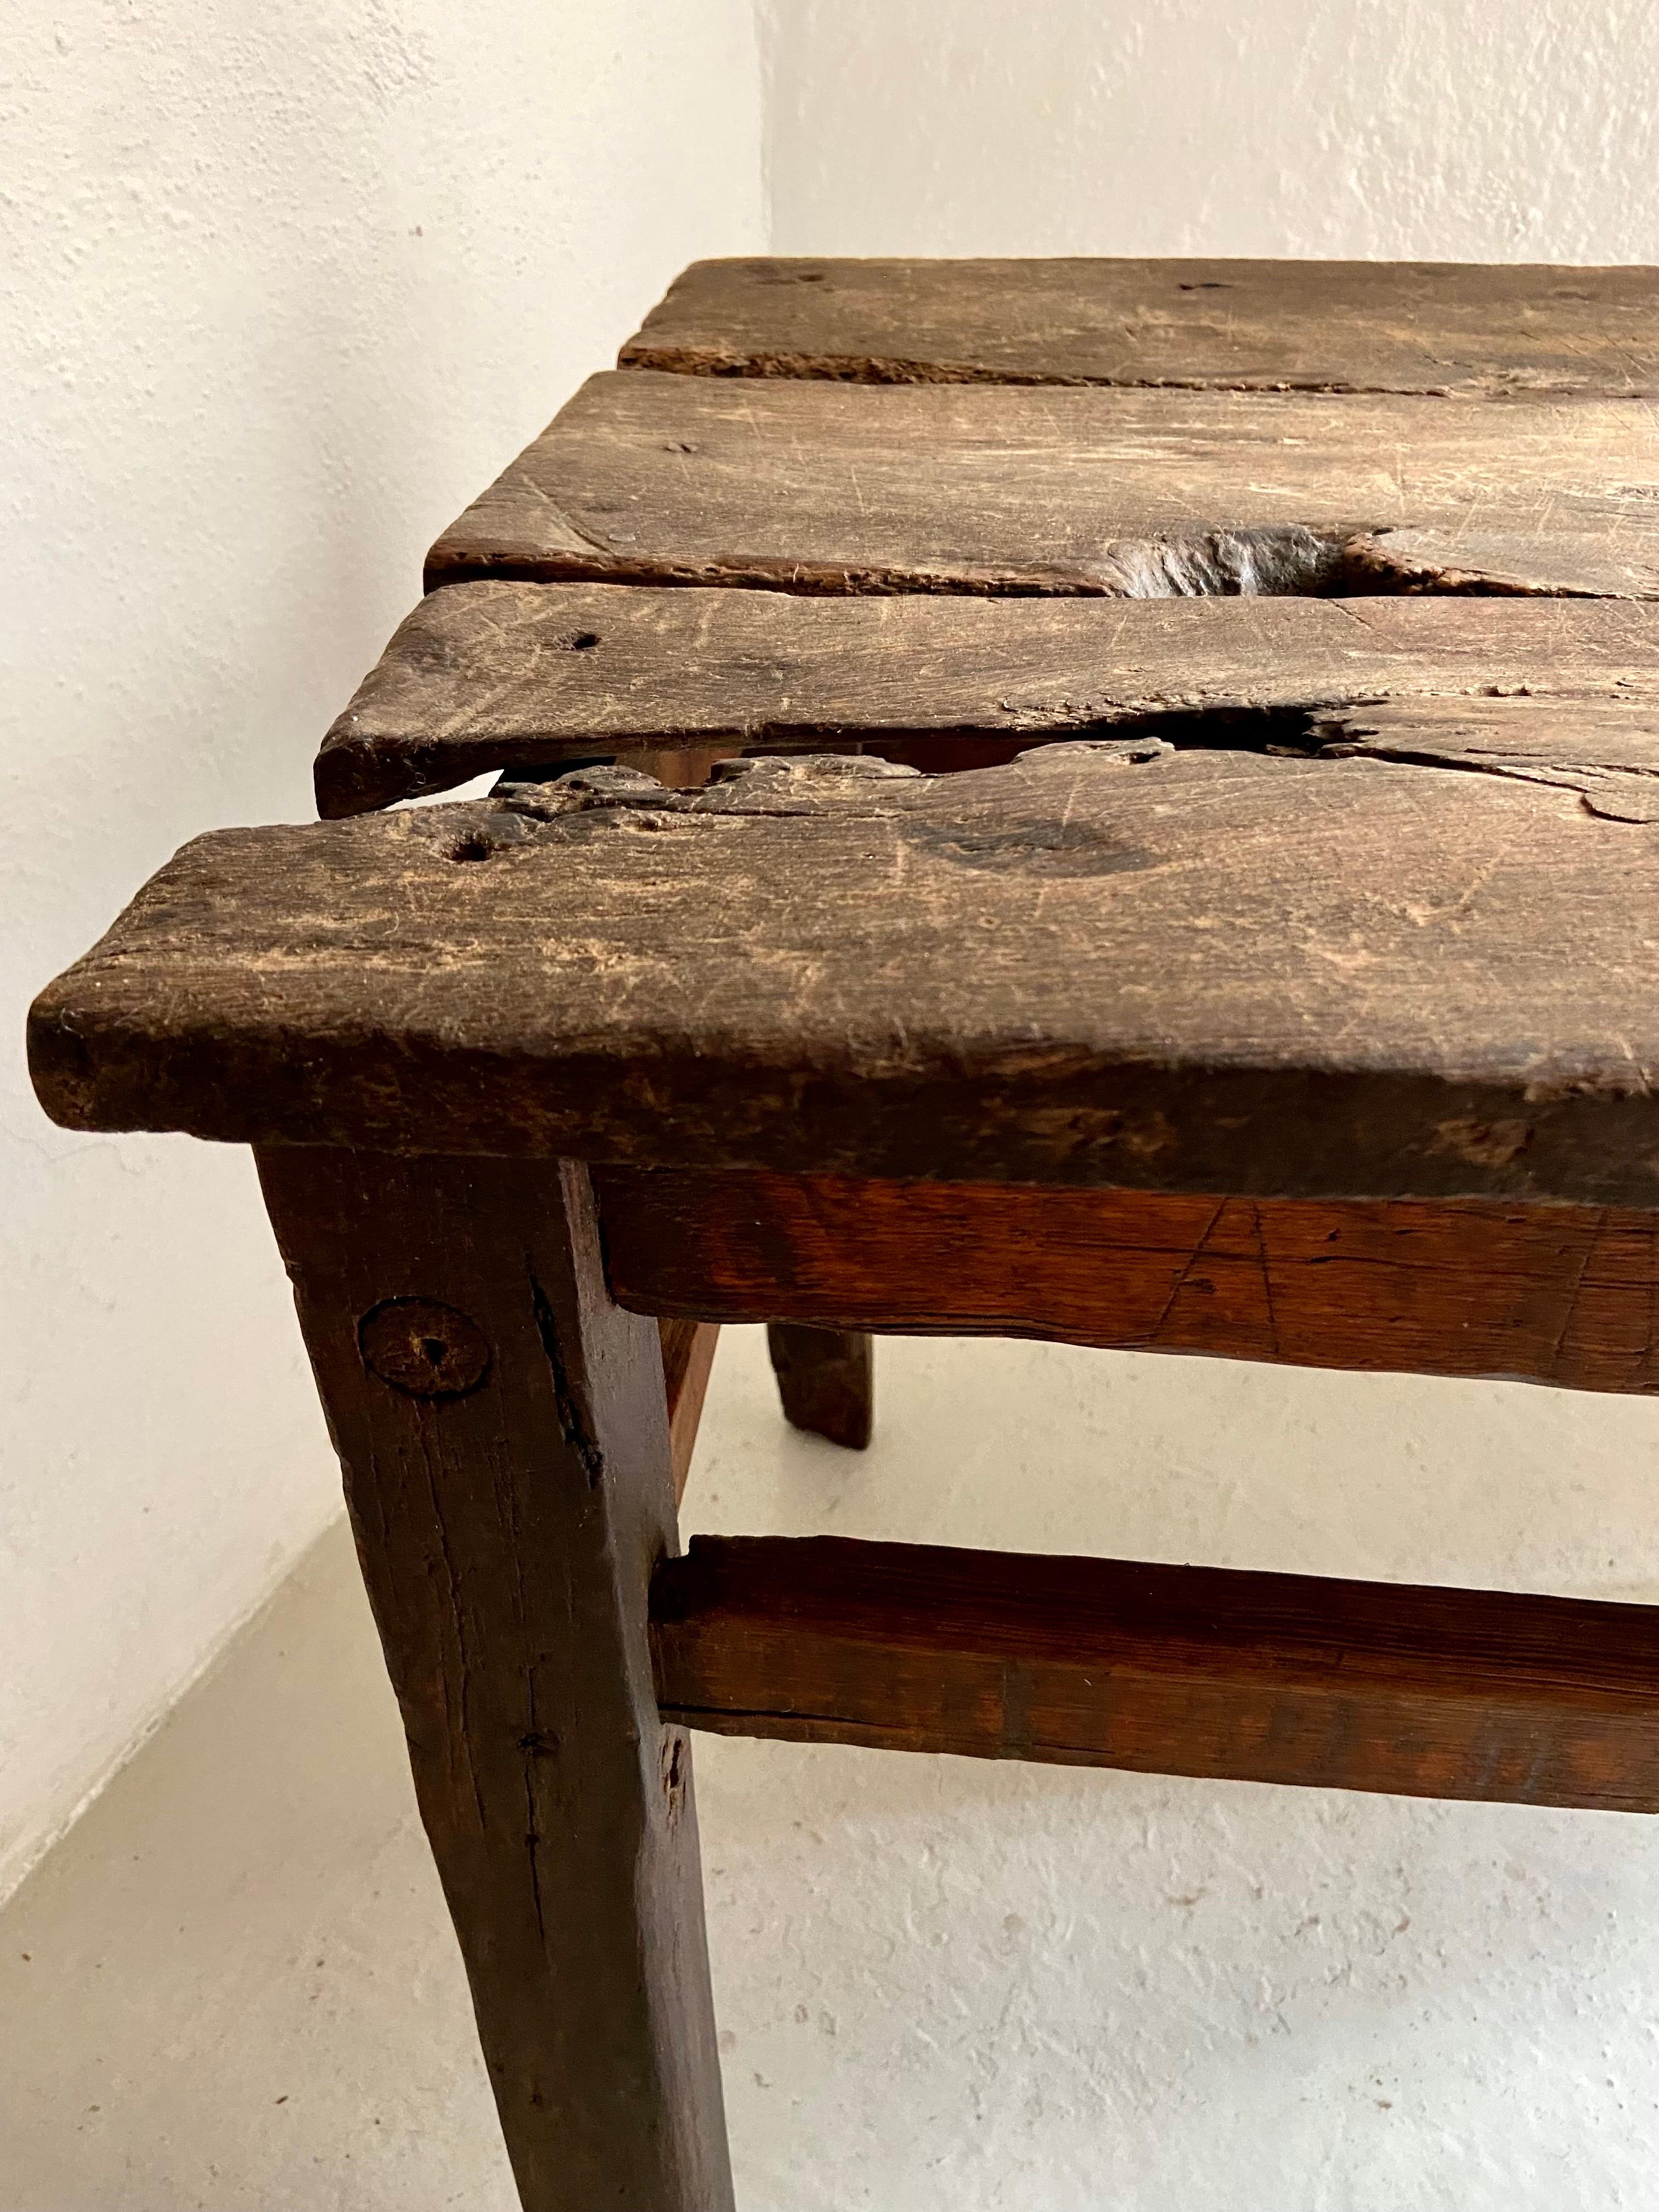 Rustic Colonial Table from Mexico, Circa Mid 19th Century